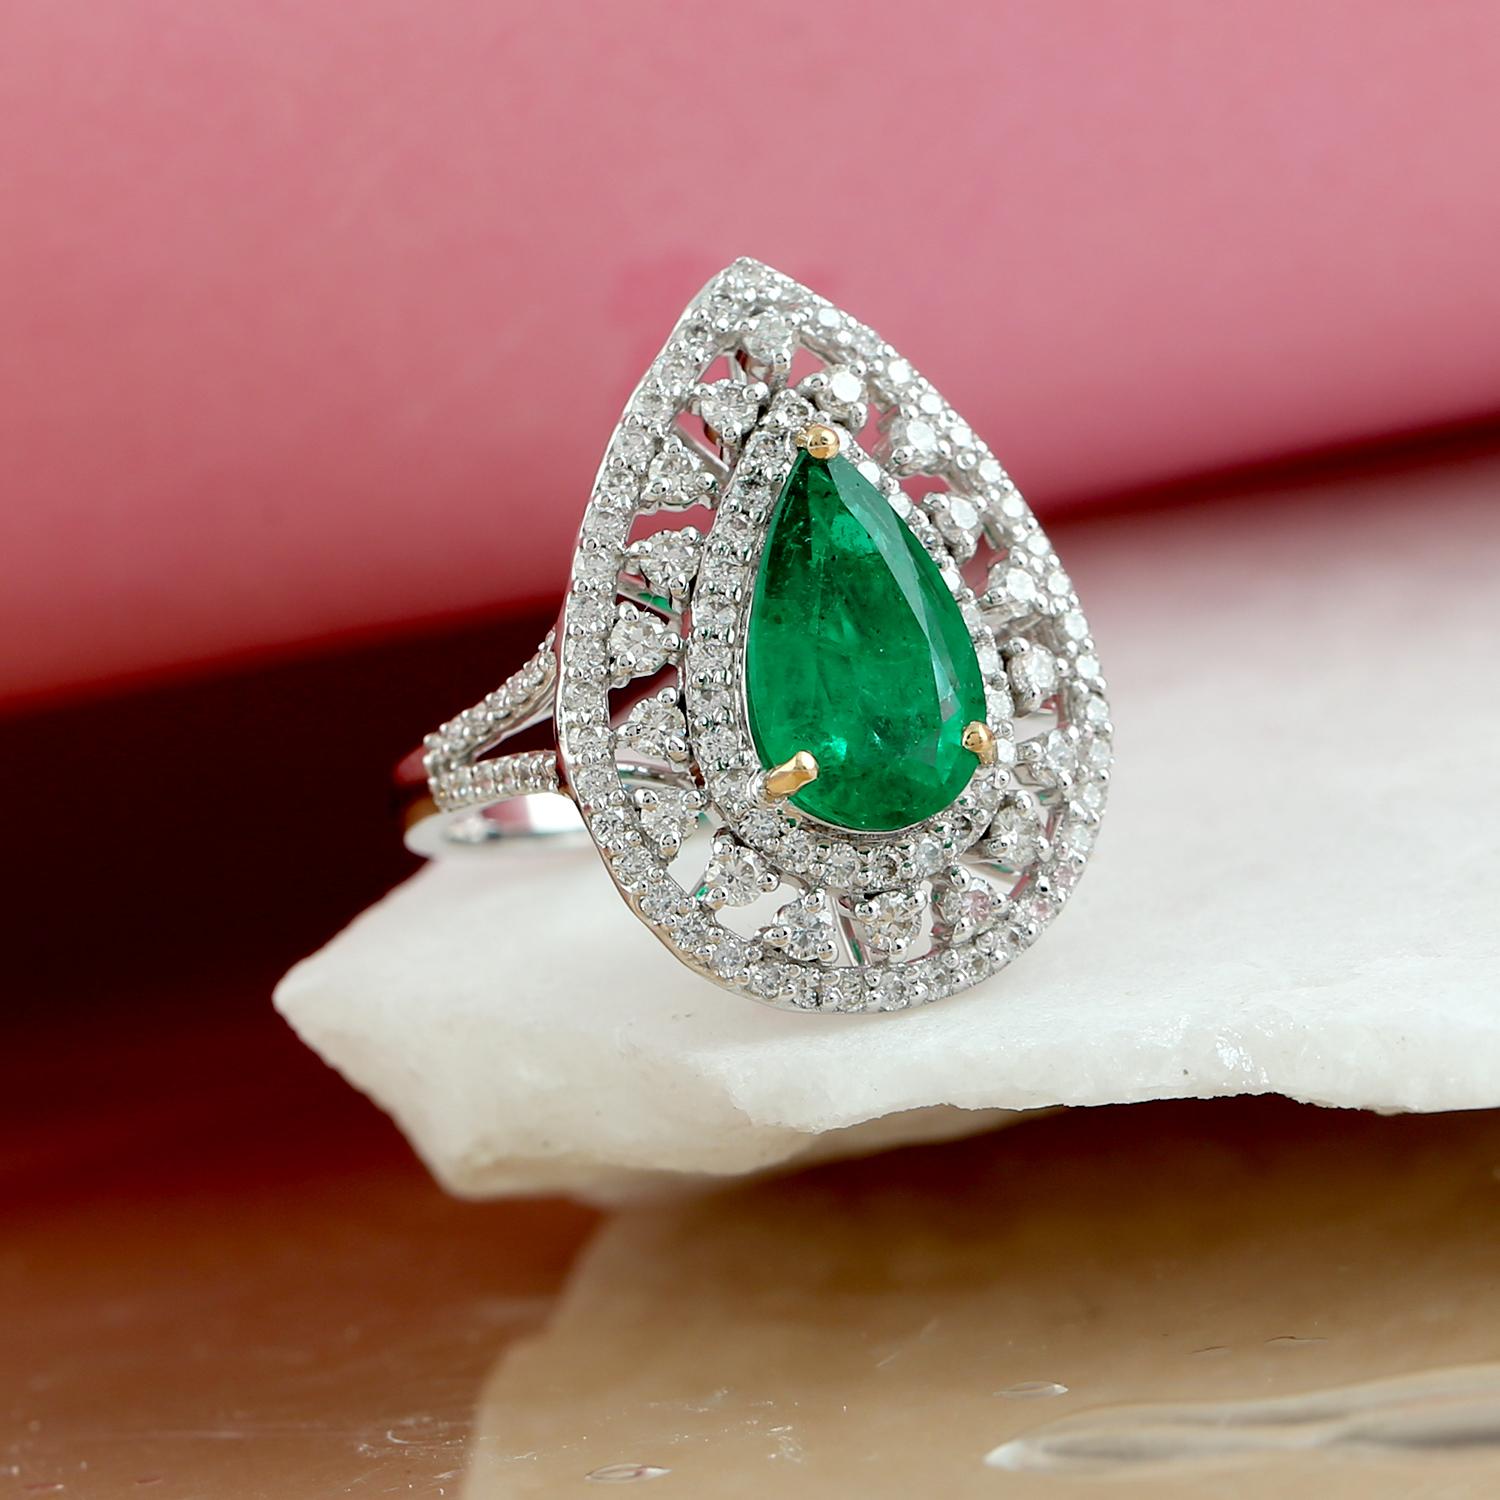 This Pear Drop Shaped Green Emerald Ring is a stunning piece of jewelry that is sure to capture attention. The focal point of the ring is a pear-shaped green emerald that is beautifully faceted and set in 18k white gold. Surrounding the emerald is a